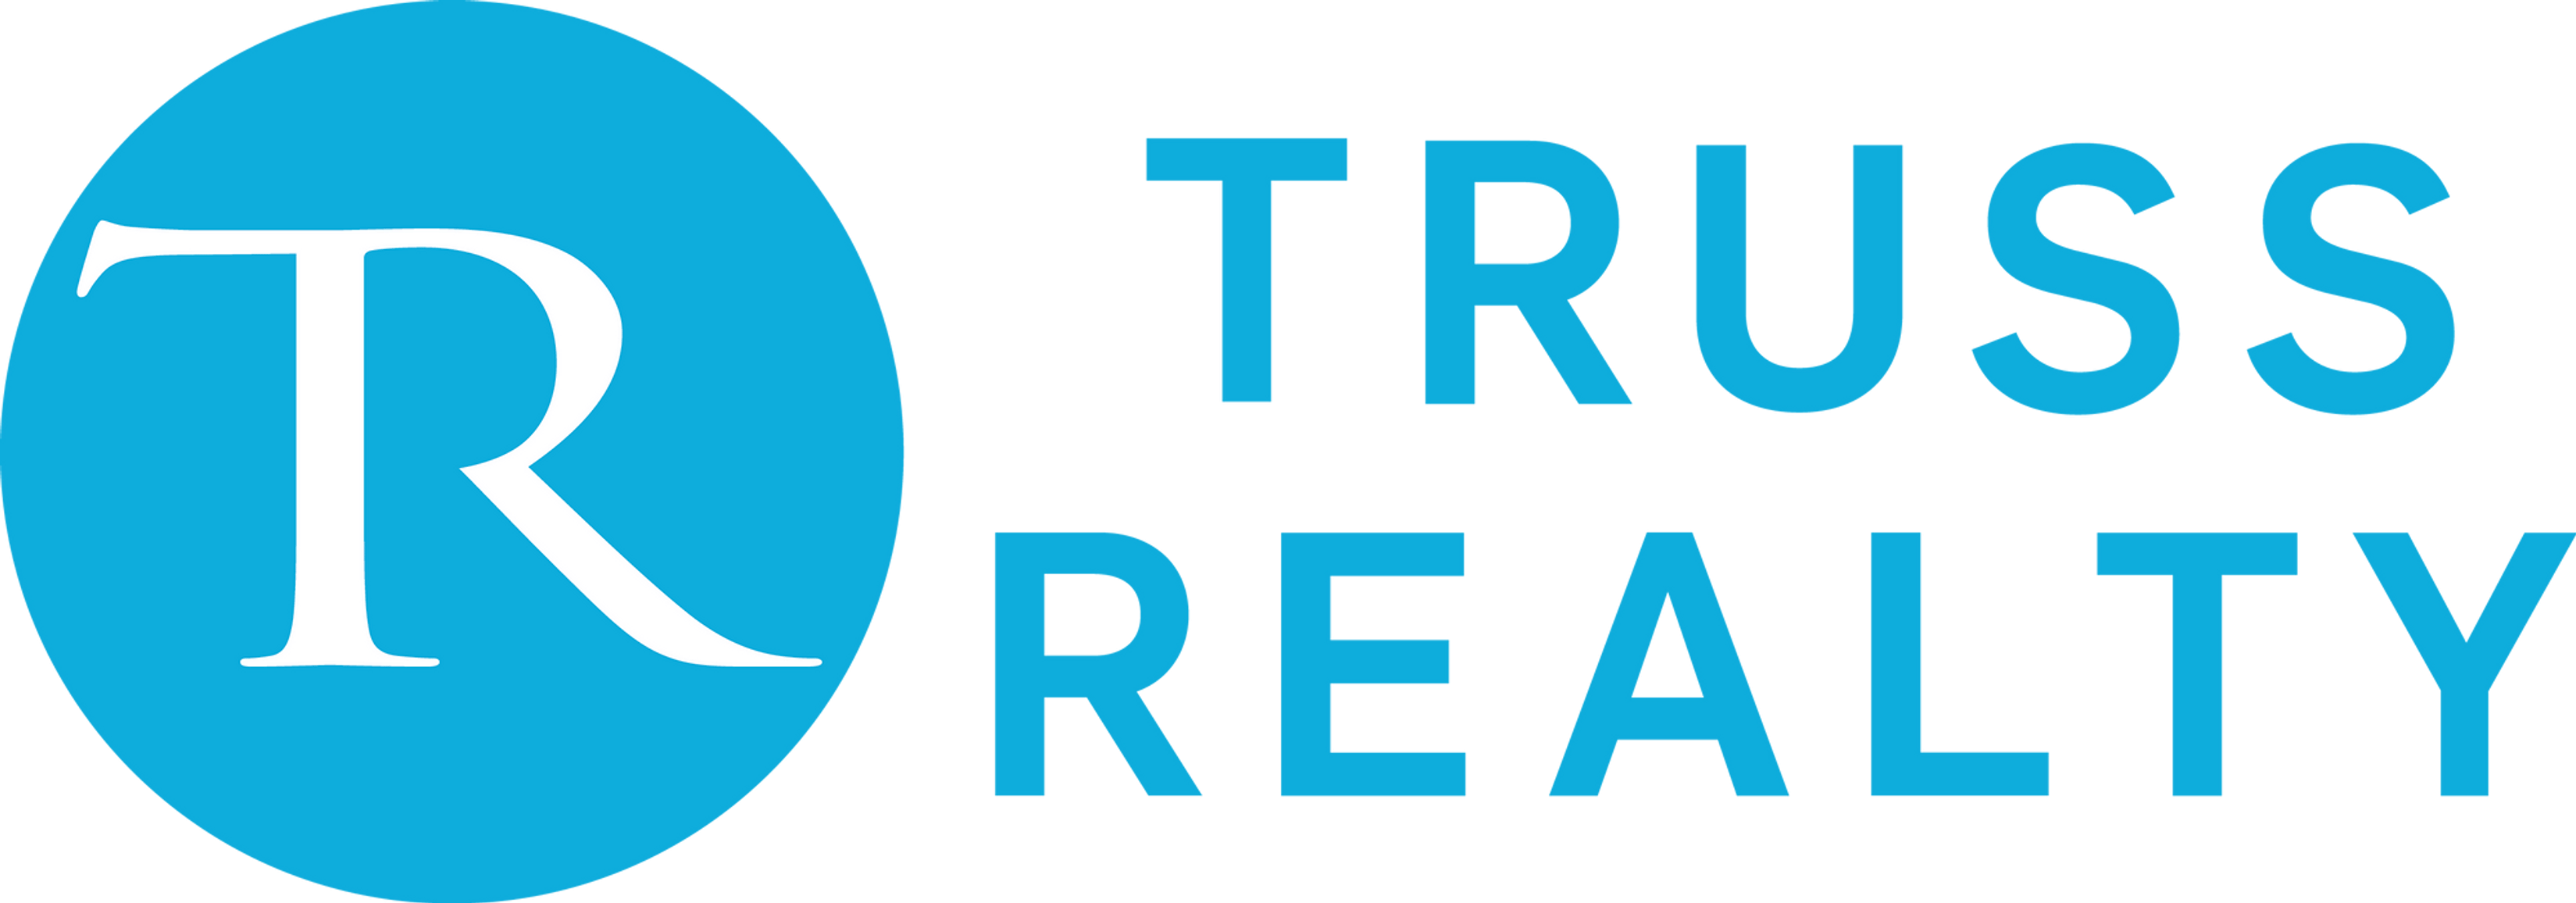 truss realty group